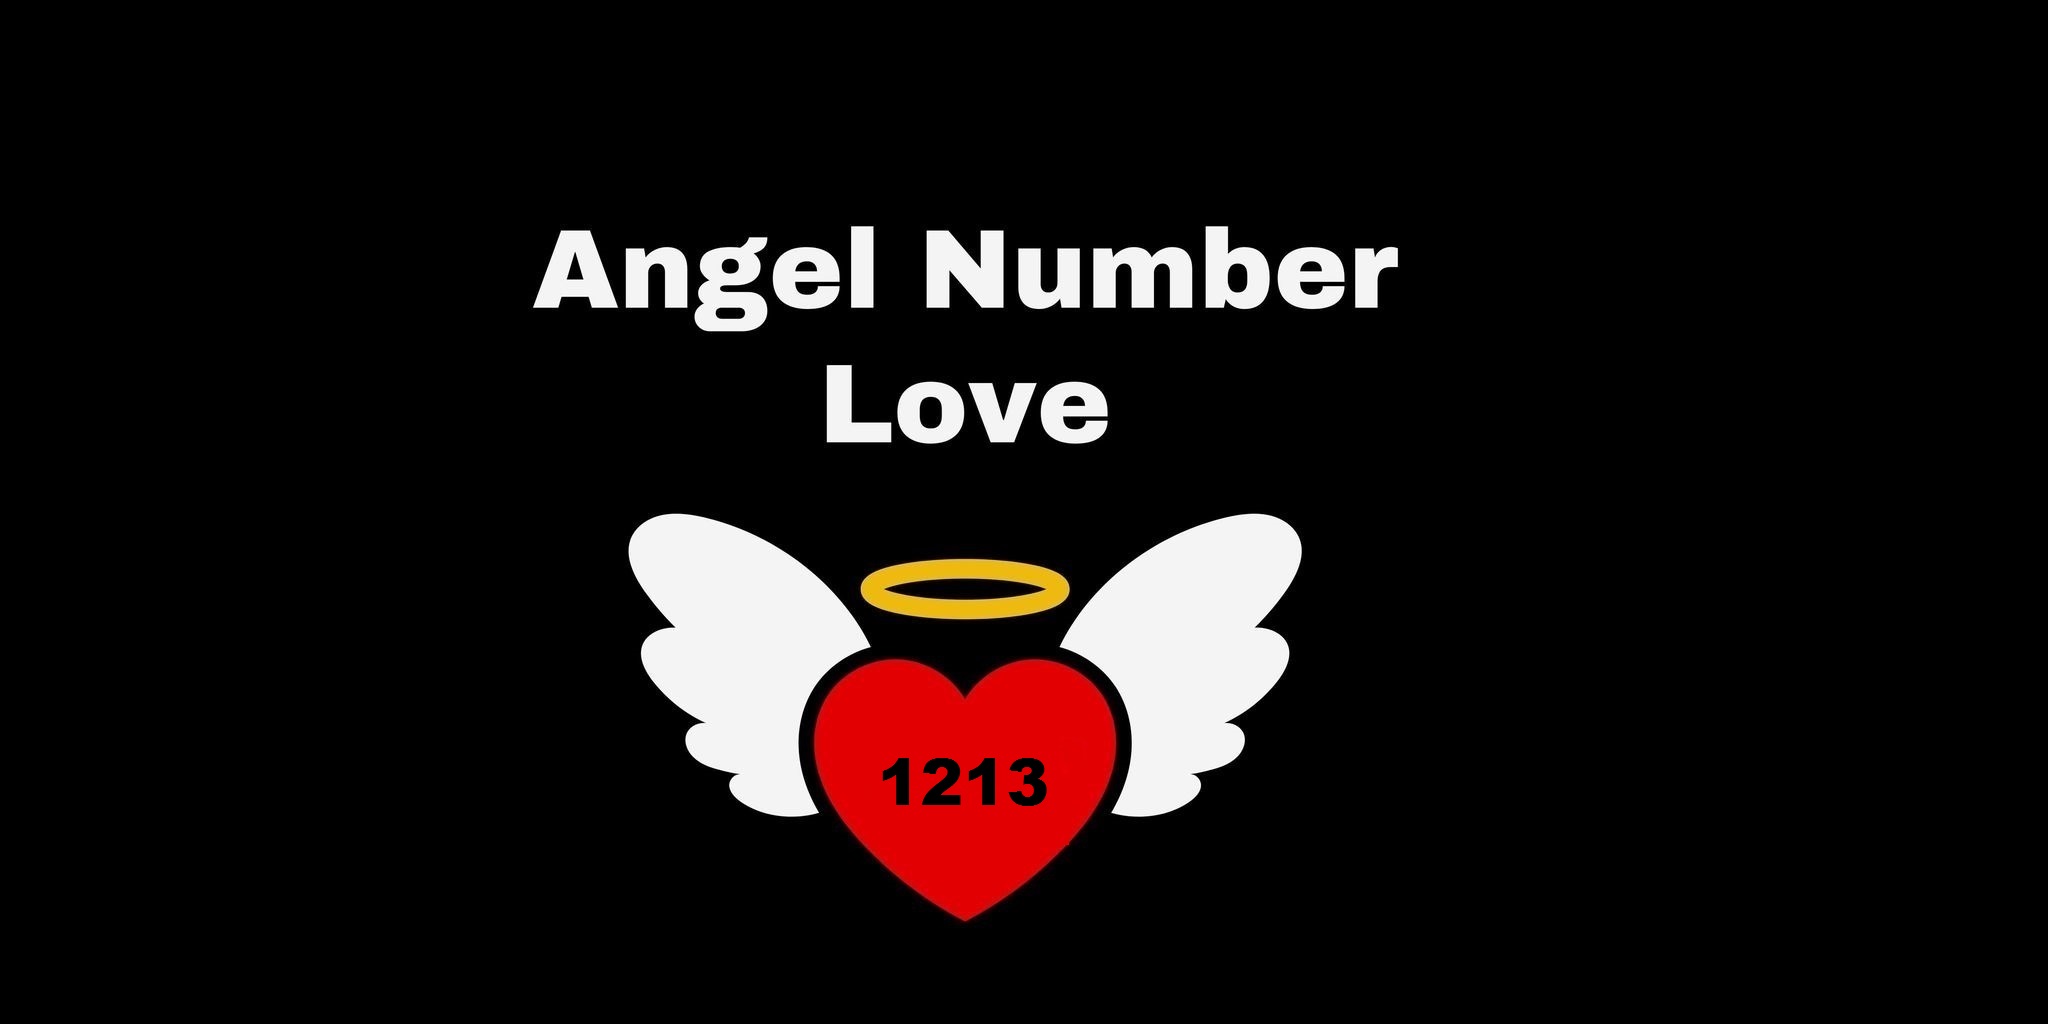 1213 Angel Number Meaning In Love